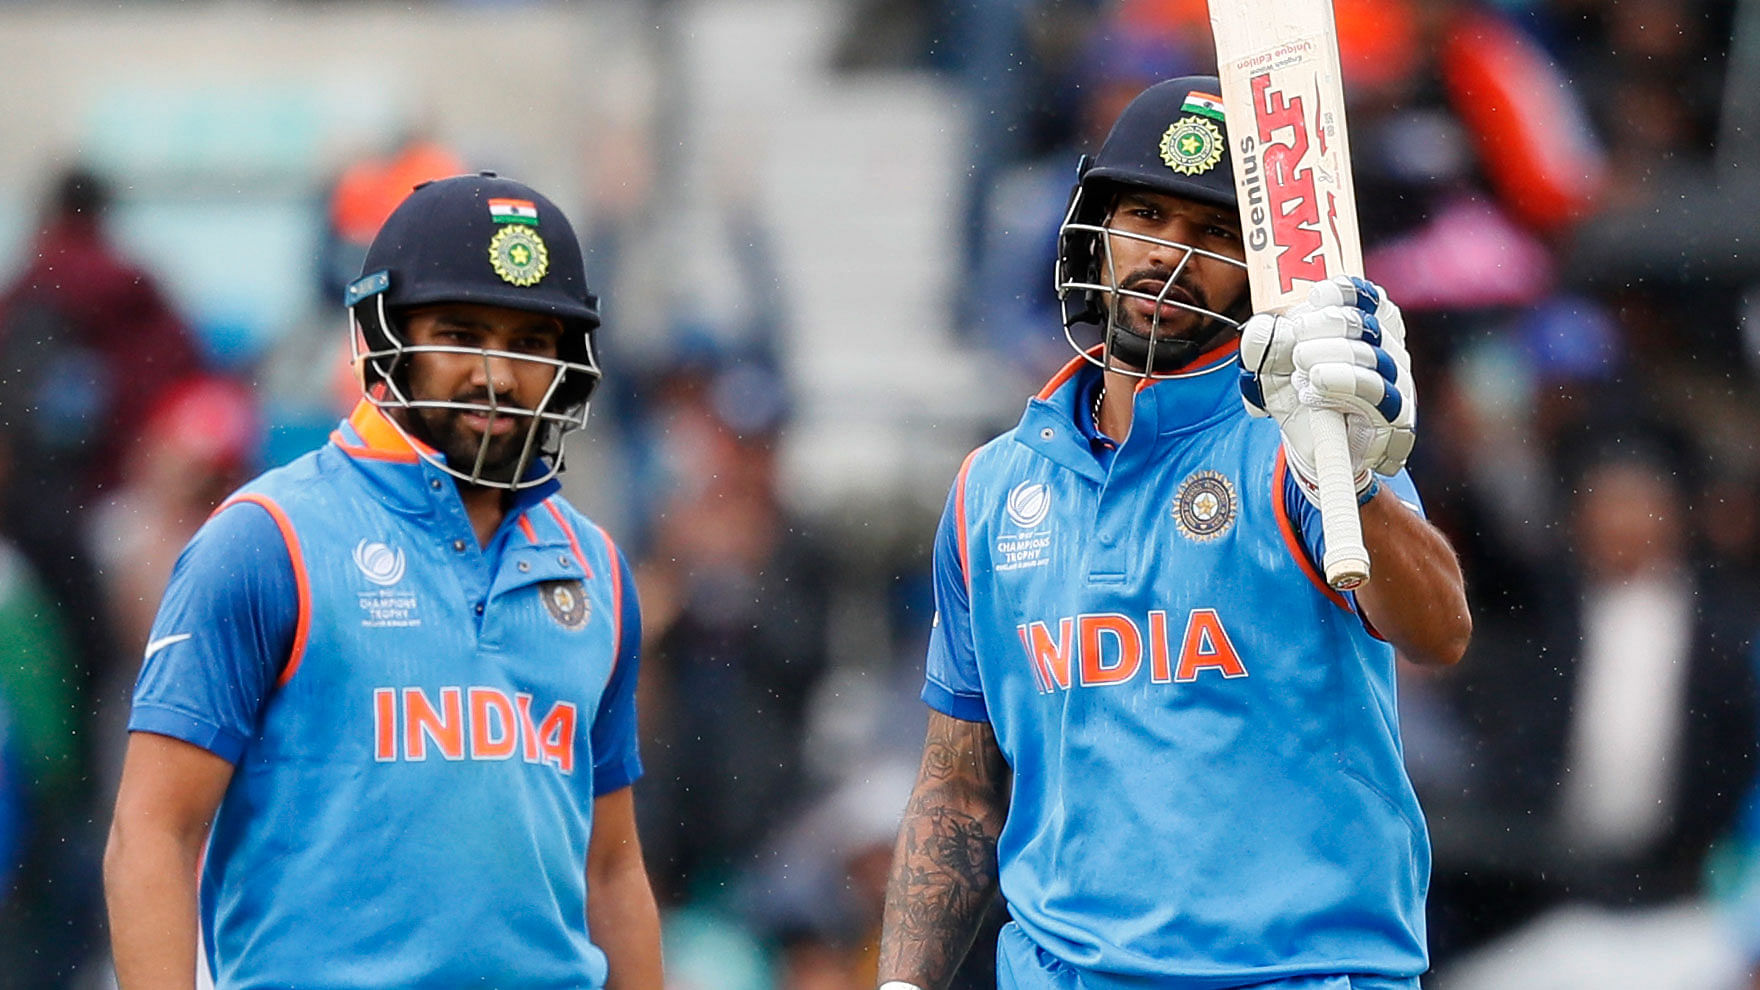 Shikhar Dhawan raises his bat after scoring a fifty as Rohit Sharma looks on during the Champions Trophy match between India and Sri Lanka.